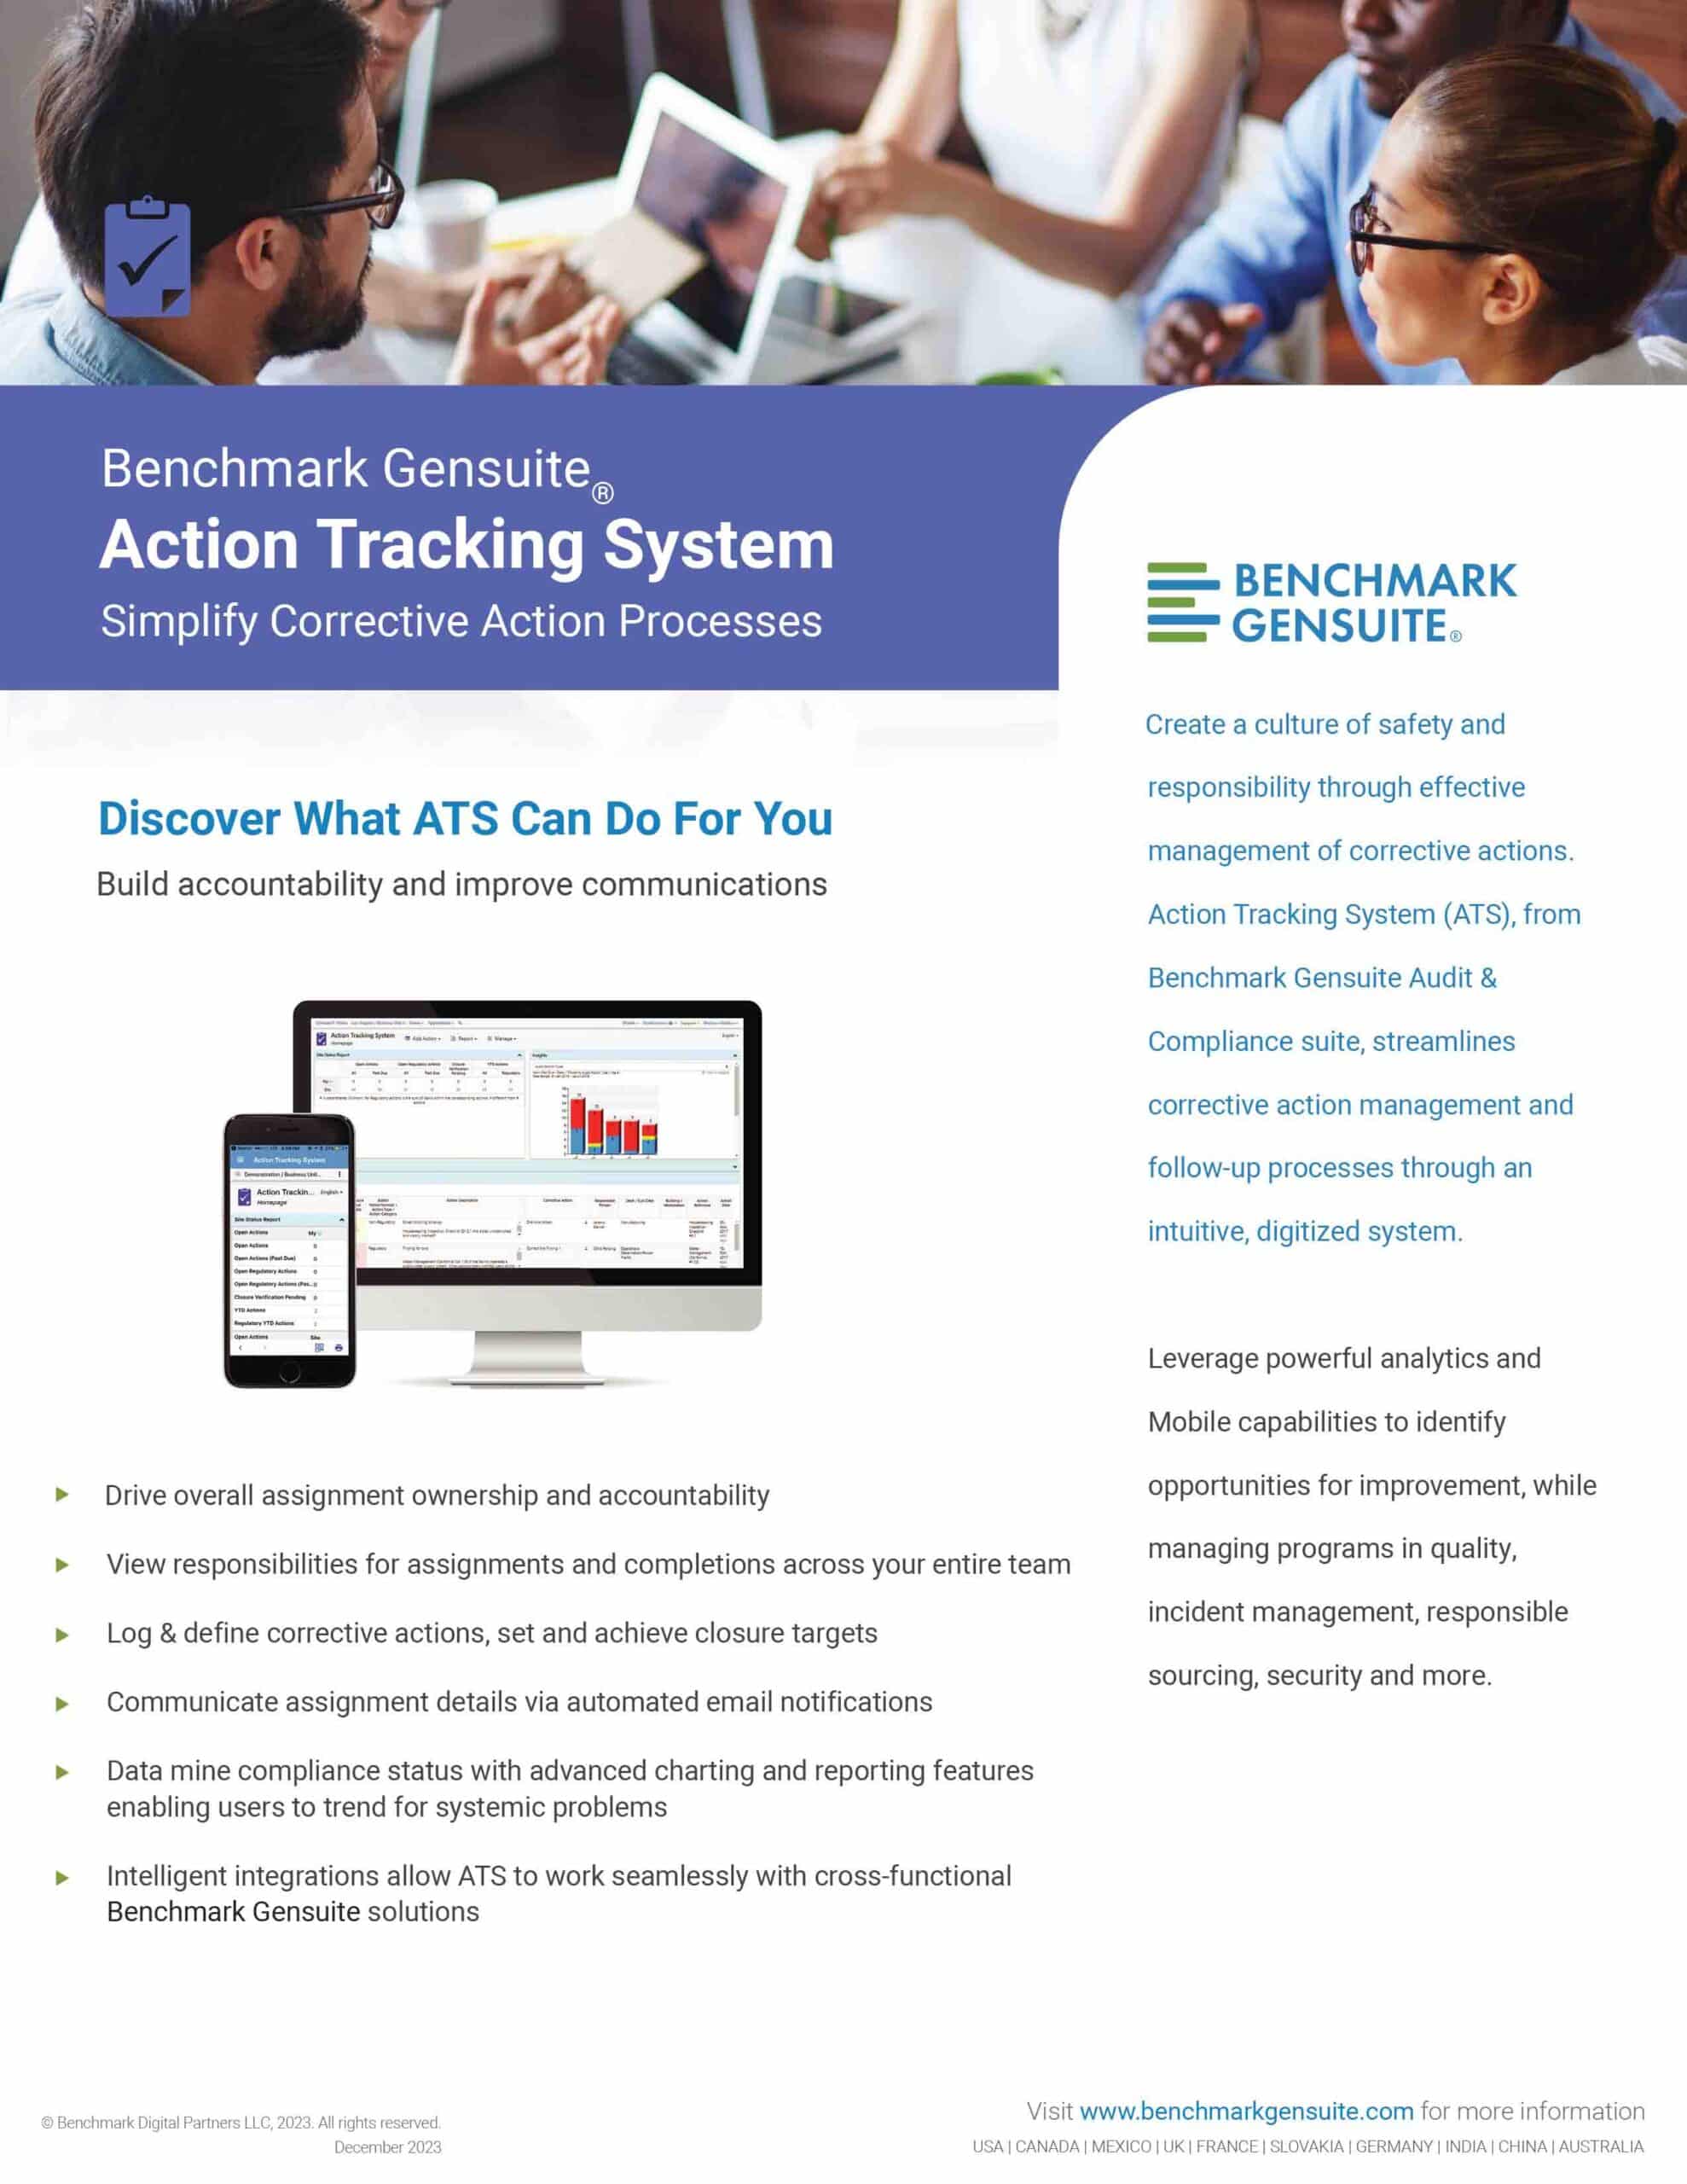 Action Tracking System